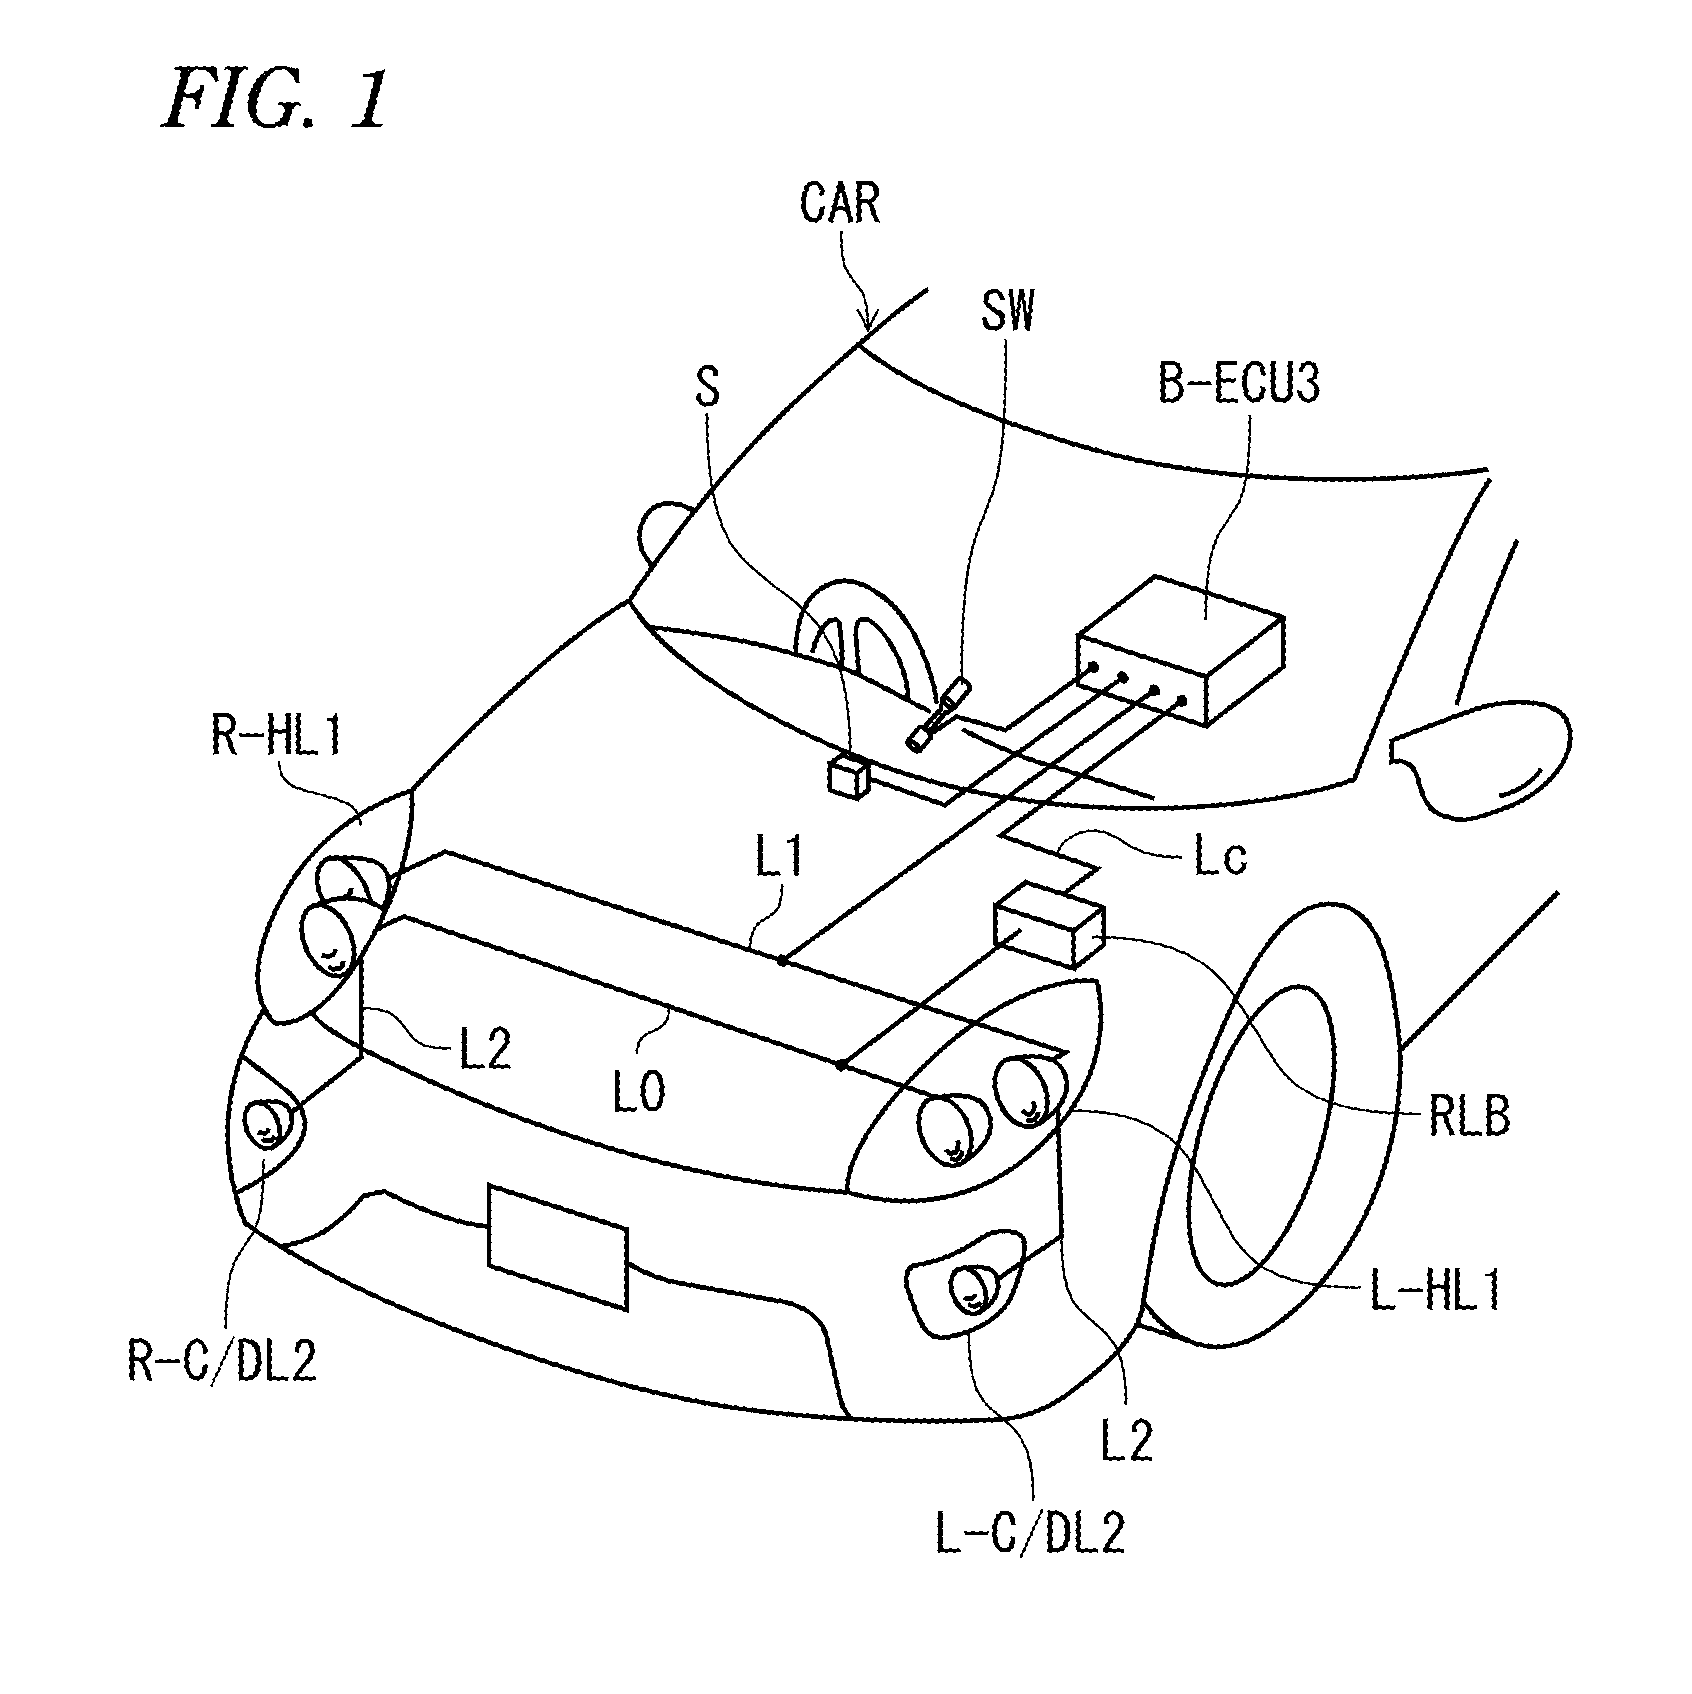 Lighting control system for vehicle lamp